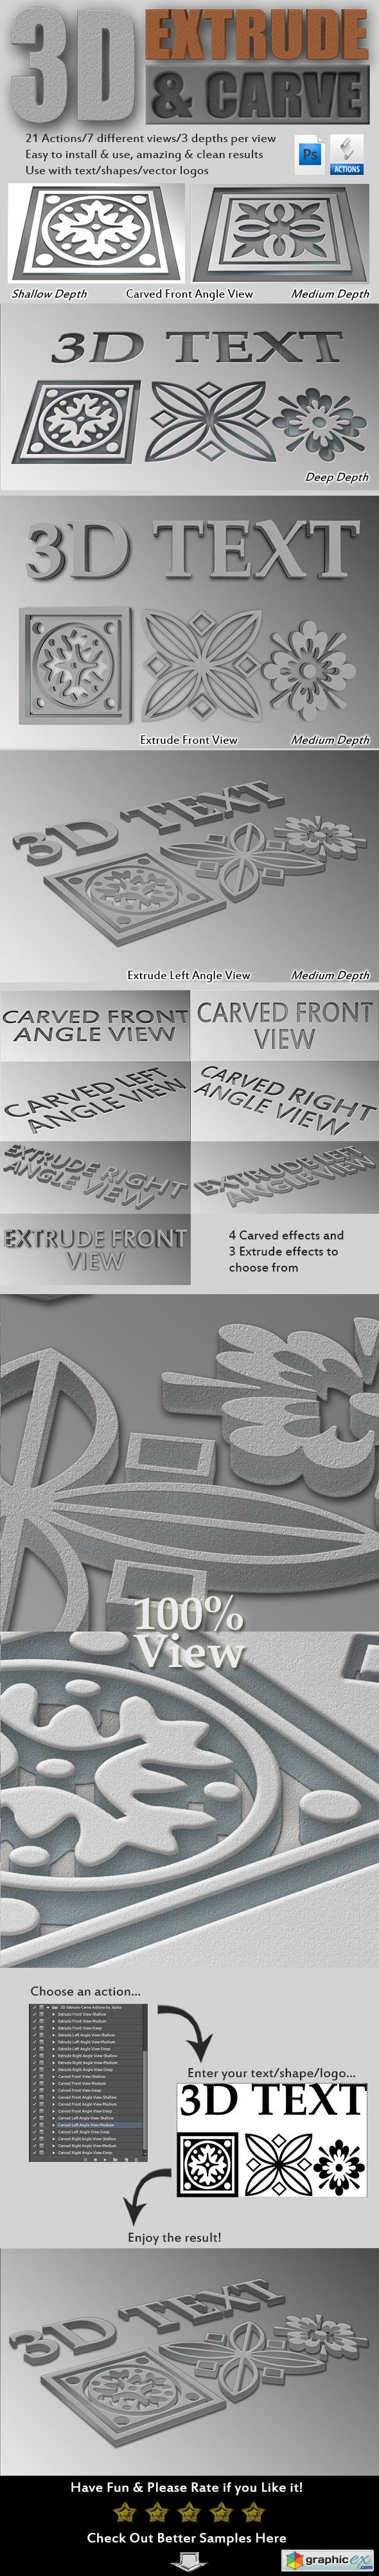 3D Extrude-Carve Actions